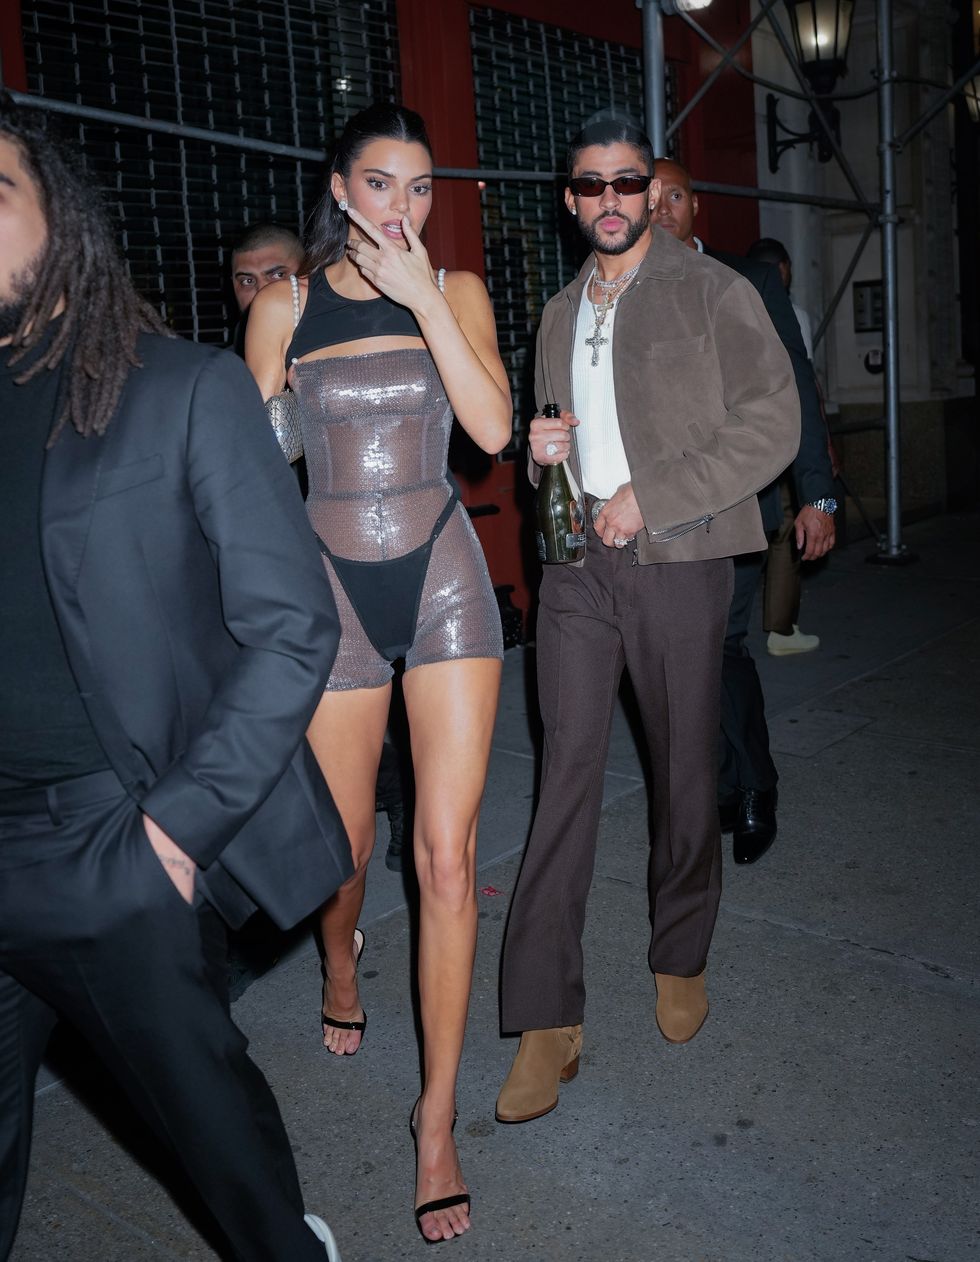 Kendall Jenner and boyfriend Bad Bunny seen on romantic date night at  upscale NYC restaurant in rare new photos together